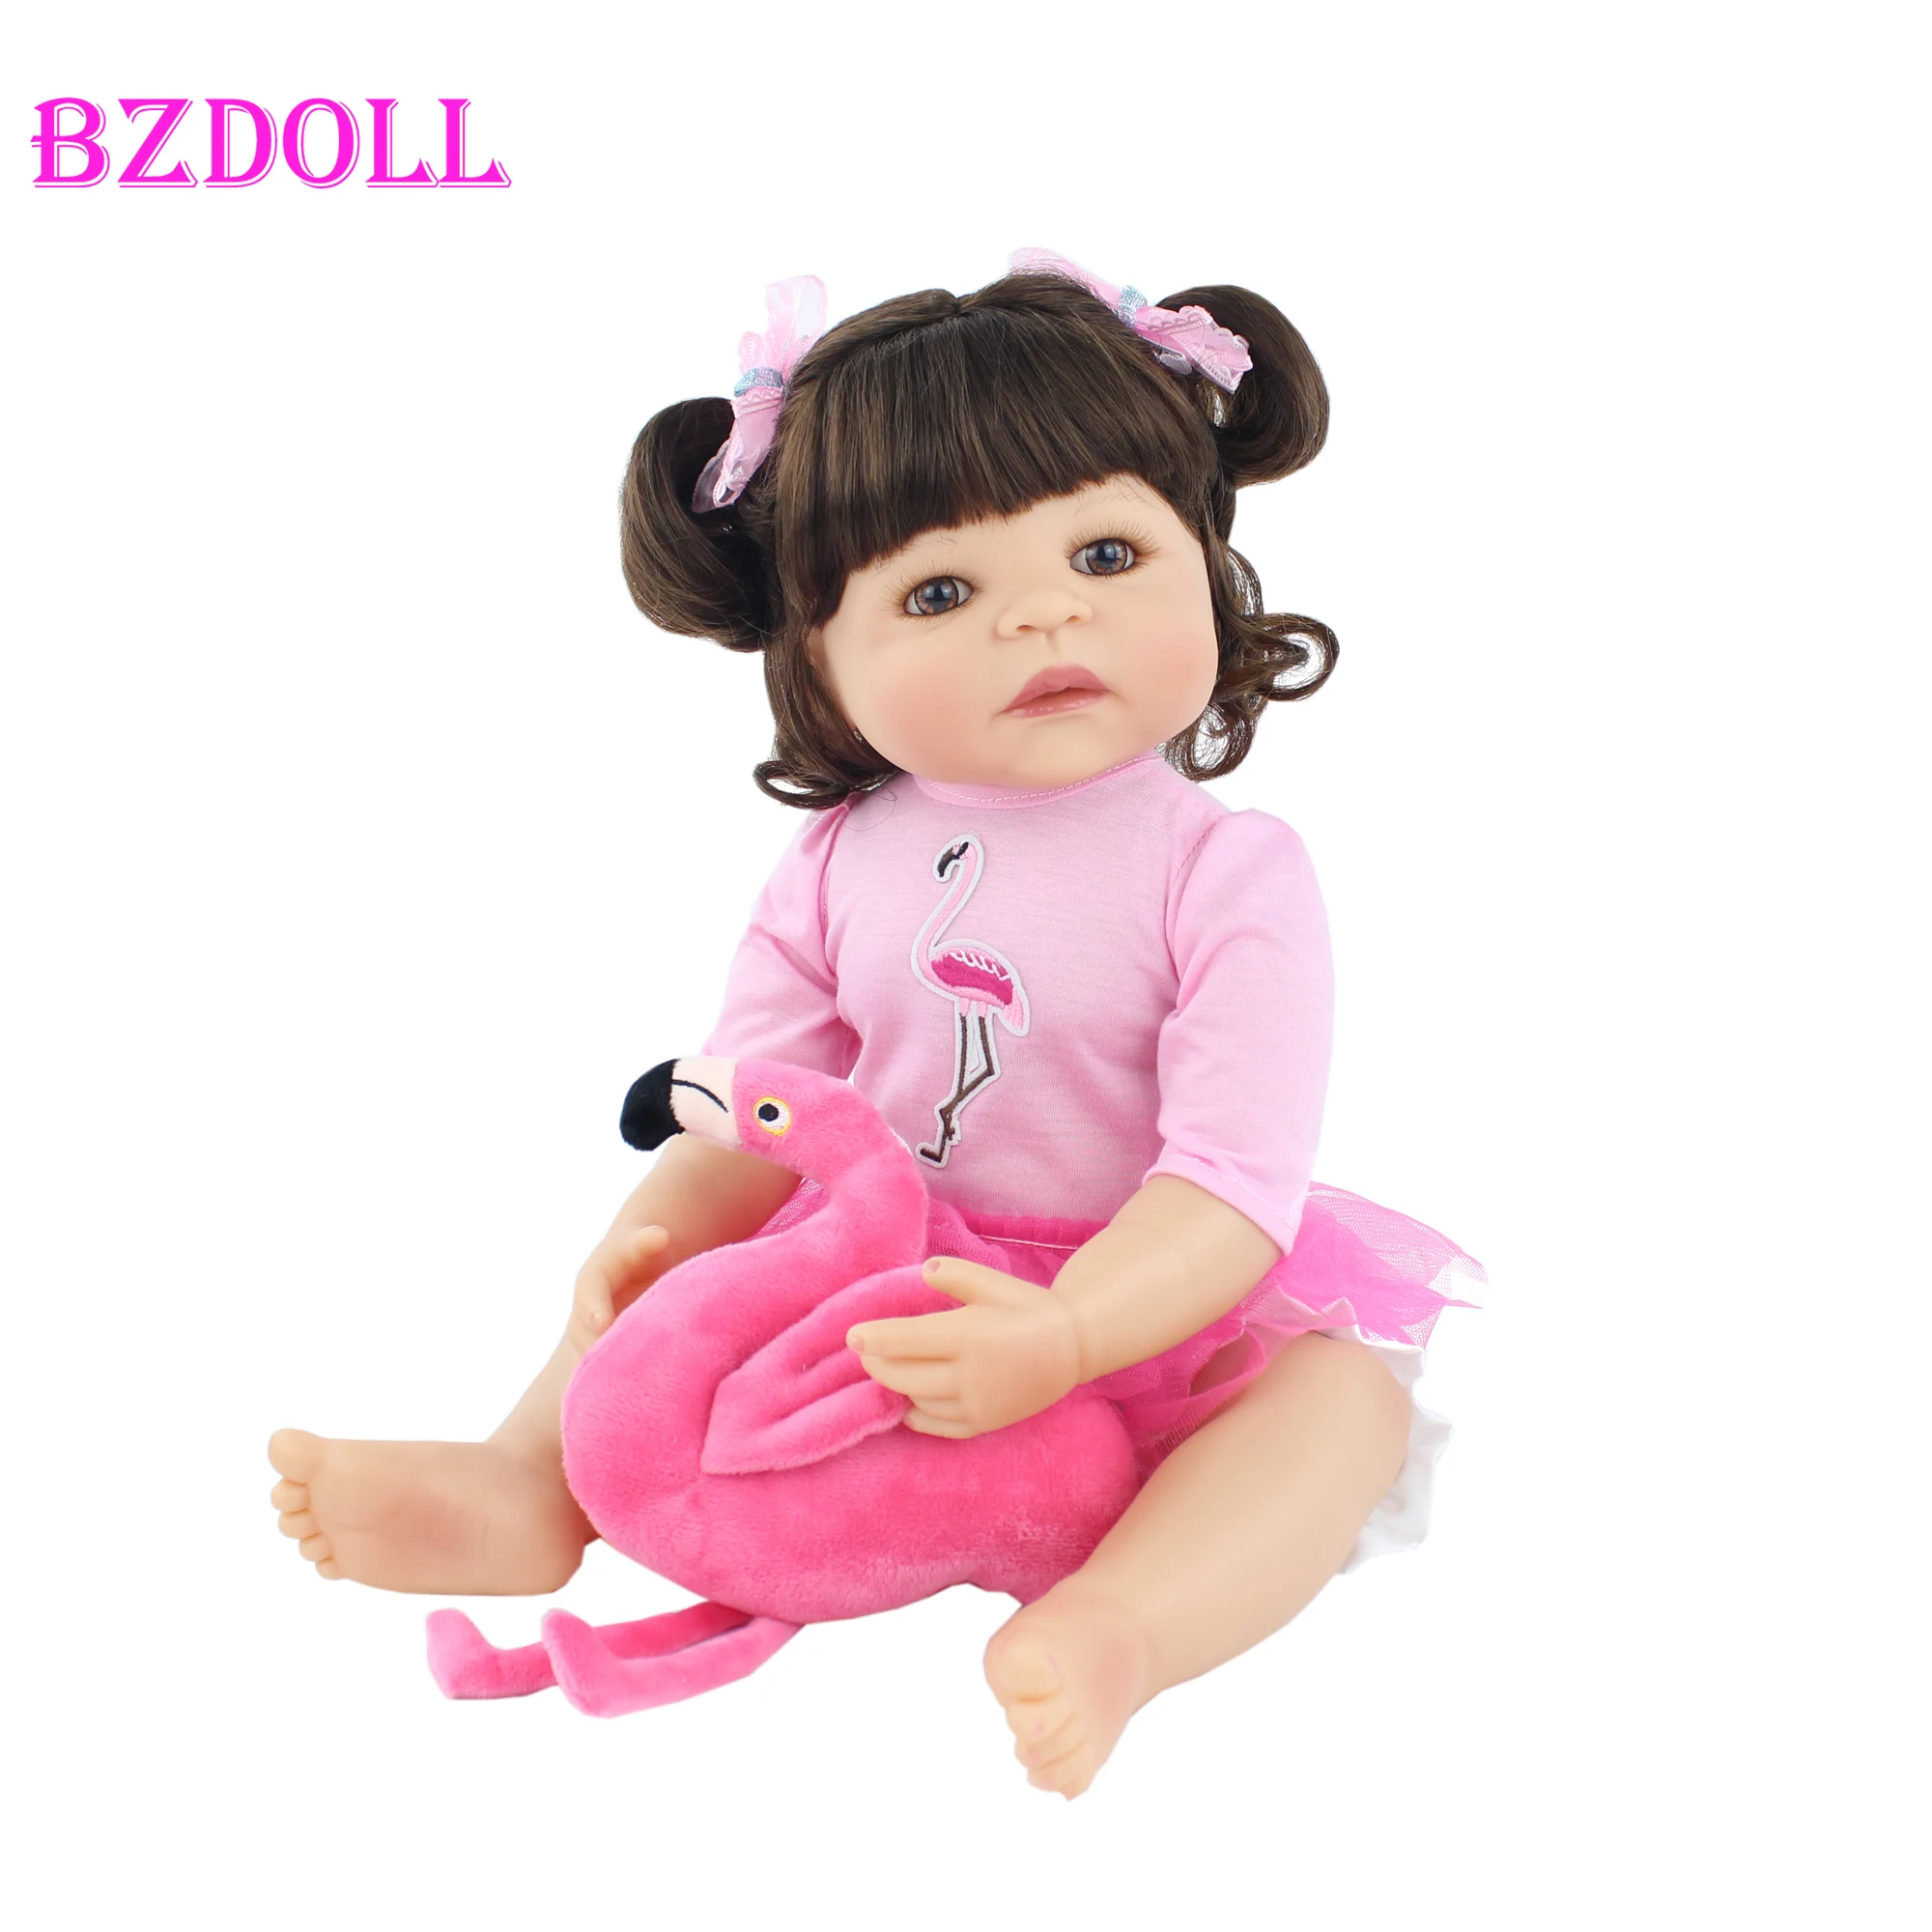 

55cm Full Silicone Reborn Doll Toy For Girl Newborn Pink Dress Princess Toddler Alive Babies Realistic Bebe Classic Boneca